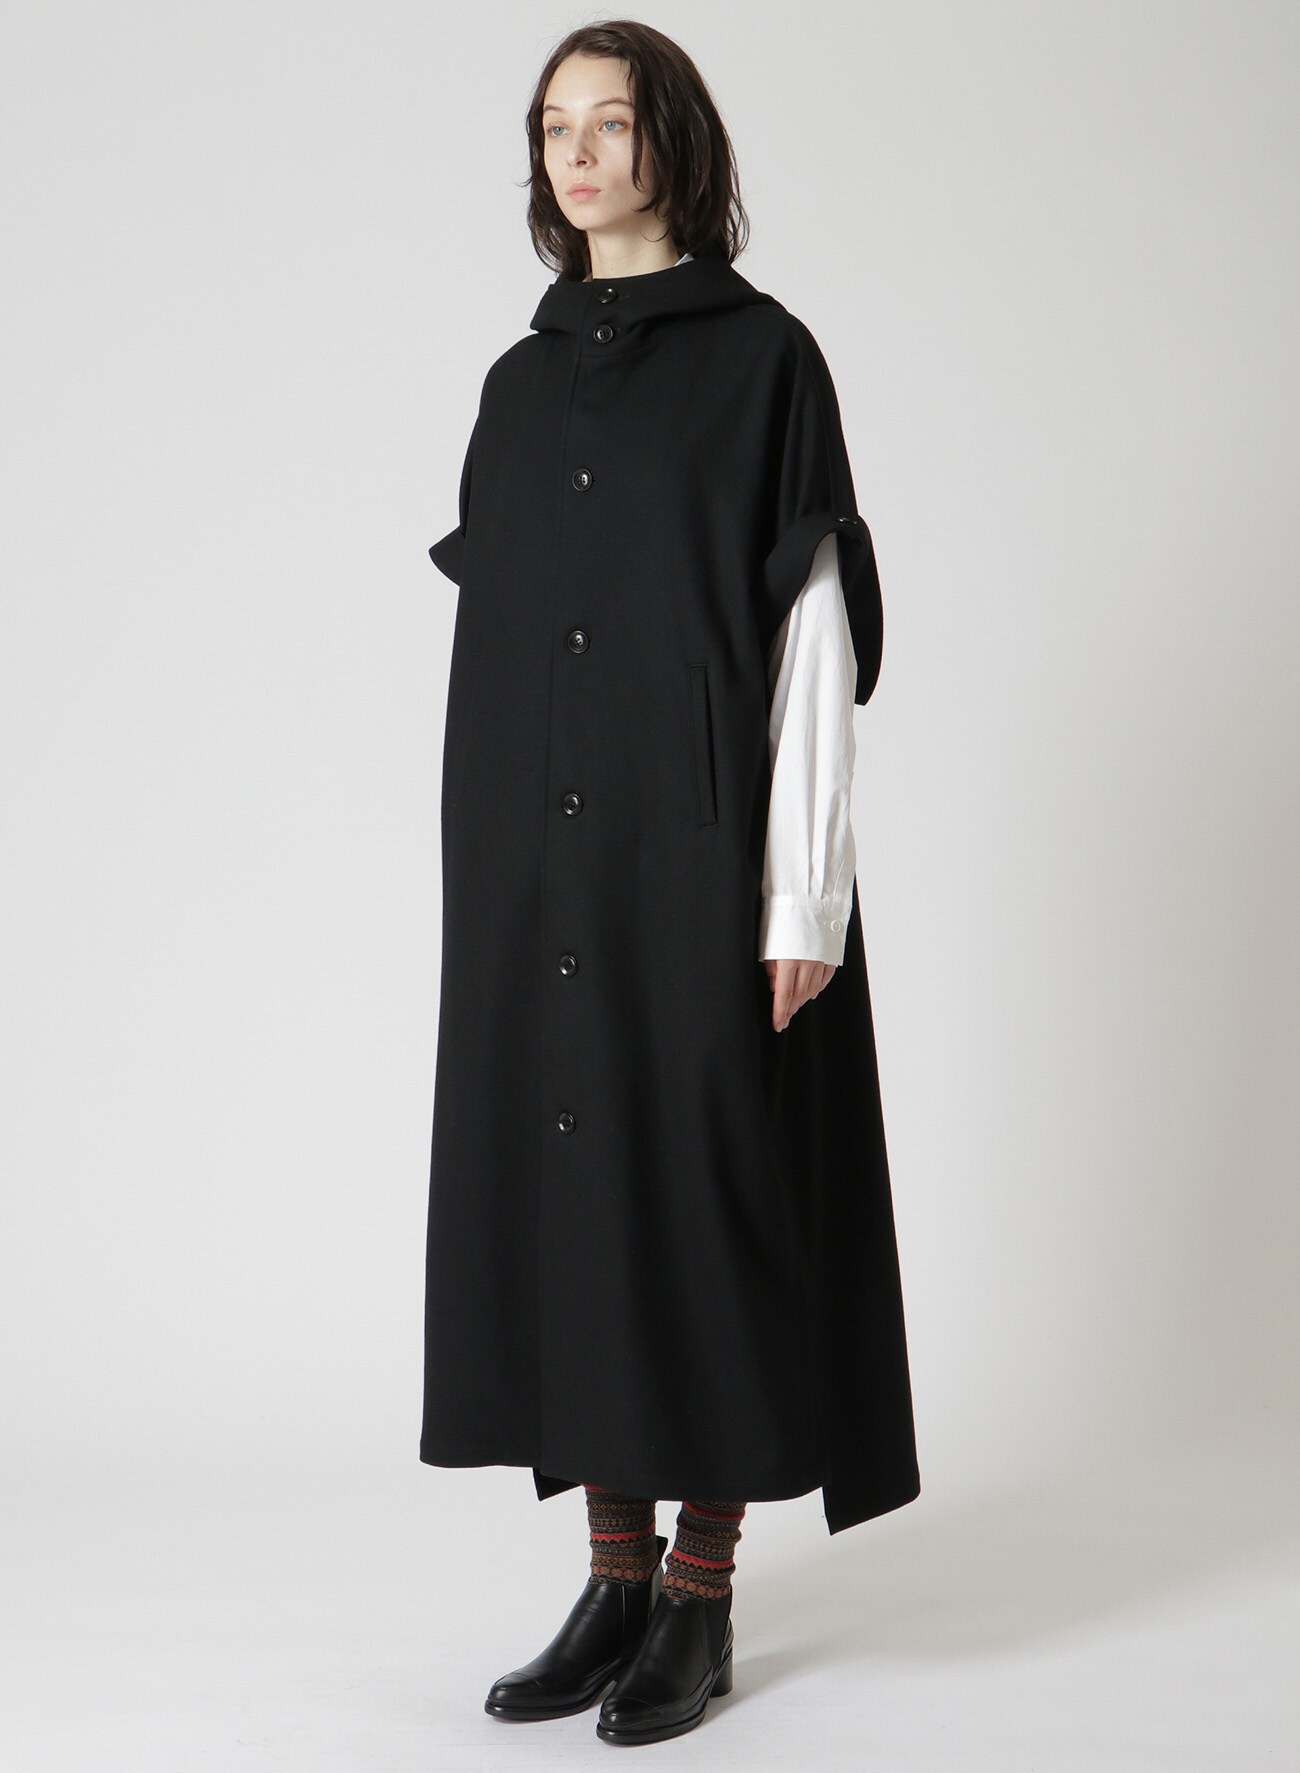 FLANNEL FRENCH SLEEVE HOODED DRESS